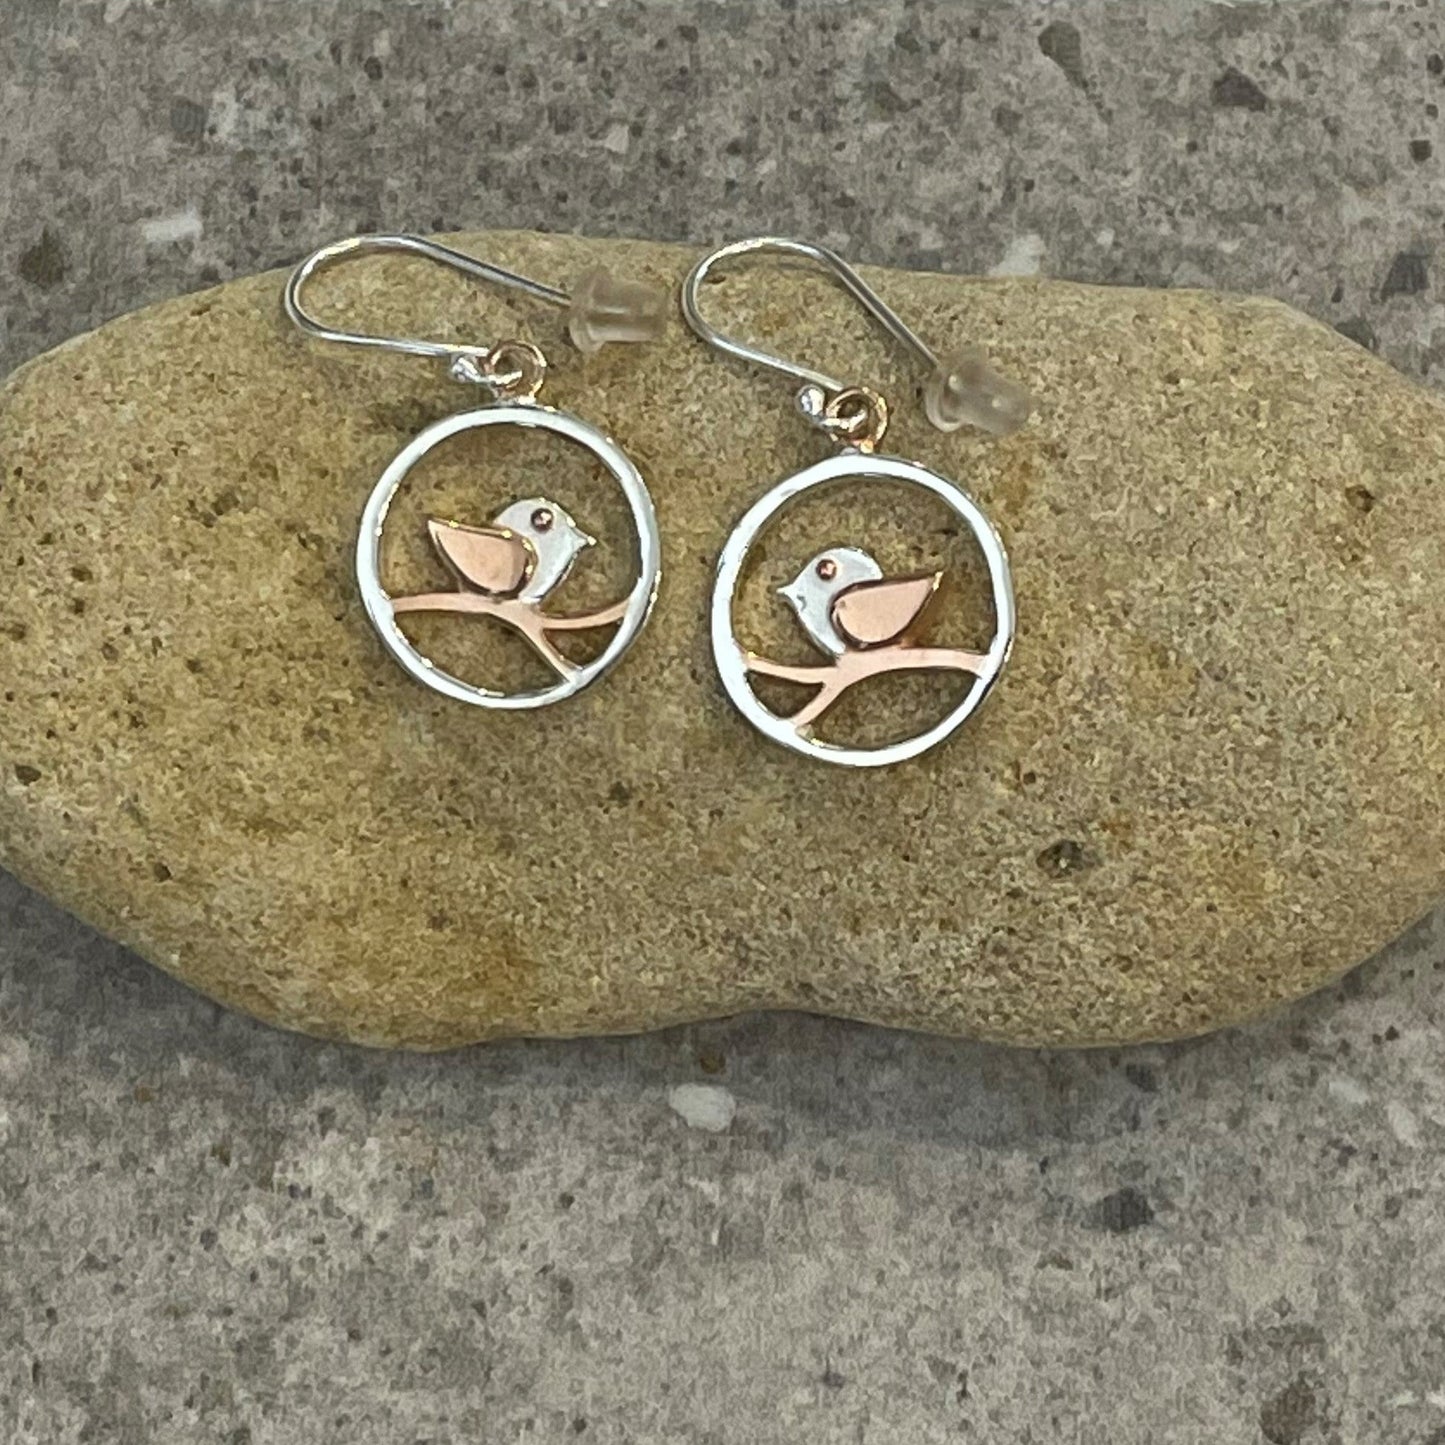 Starshine Designs: Rose Gold and Sterling Silver Bird On A Twig Earrings